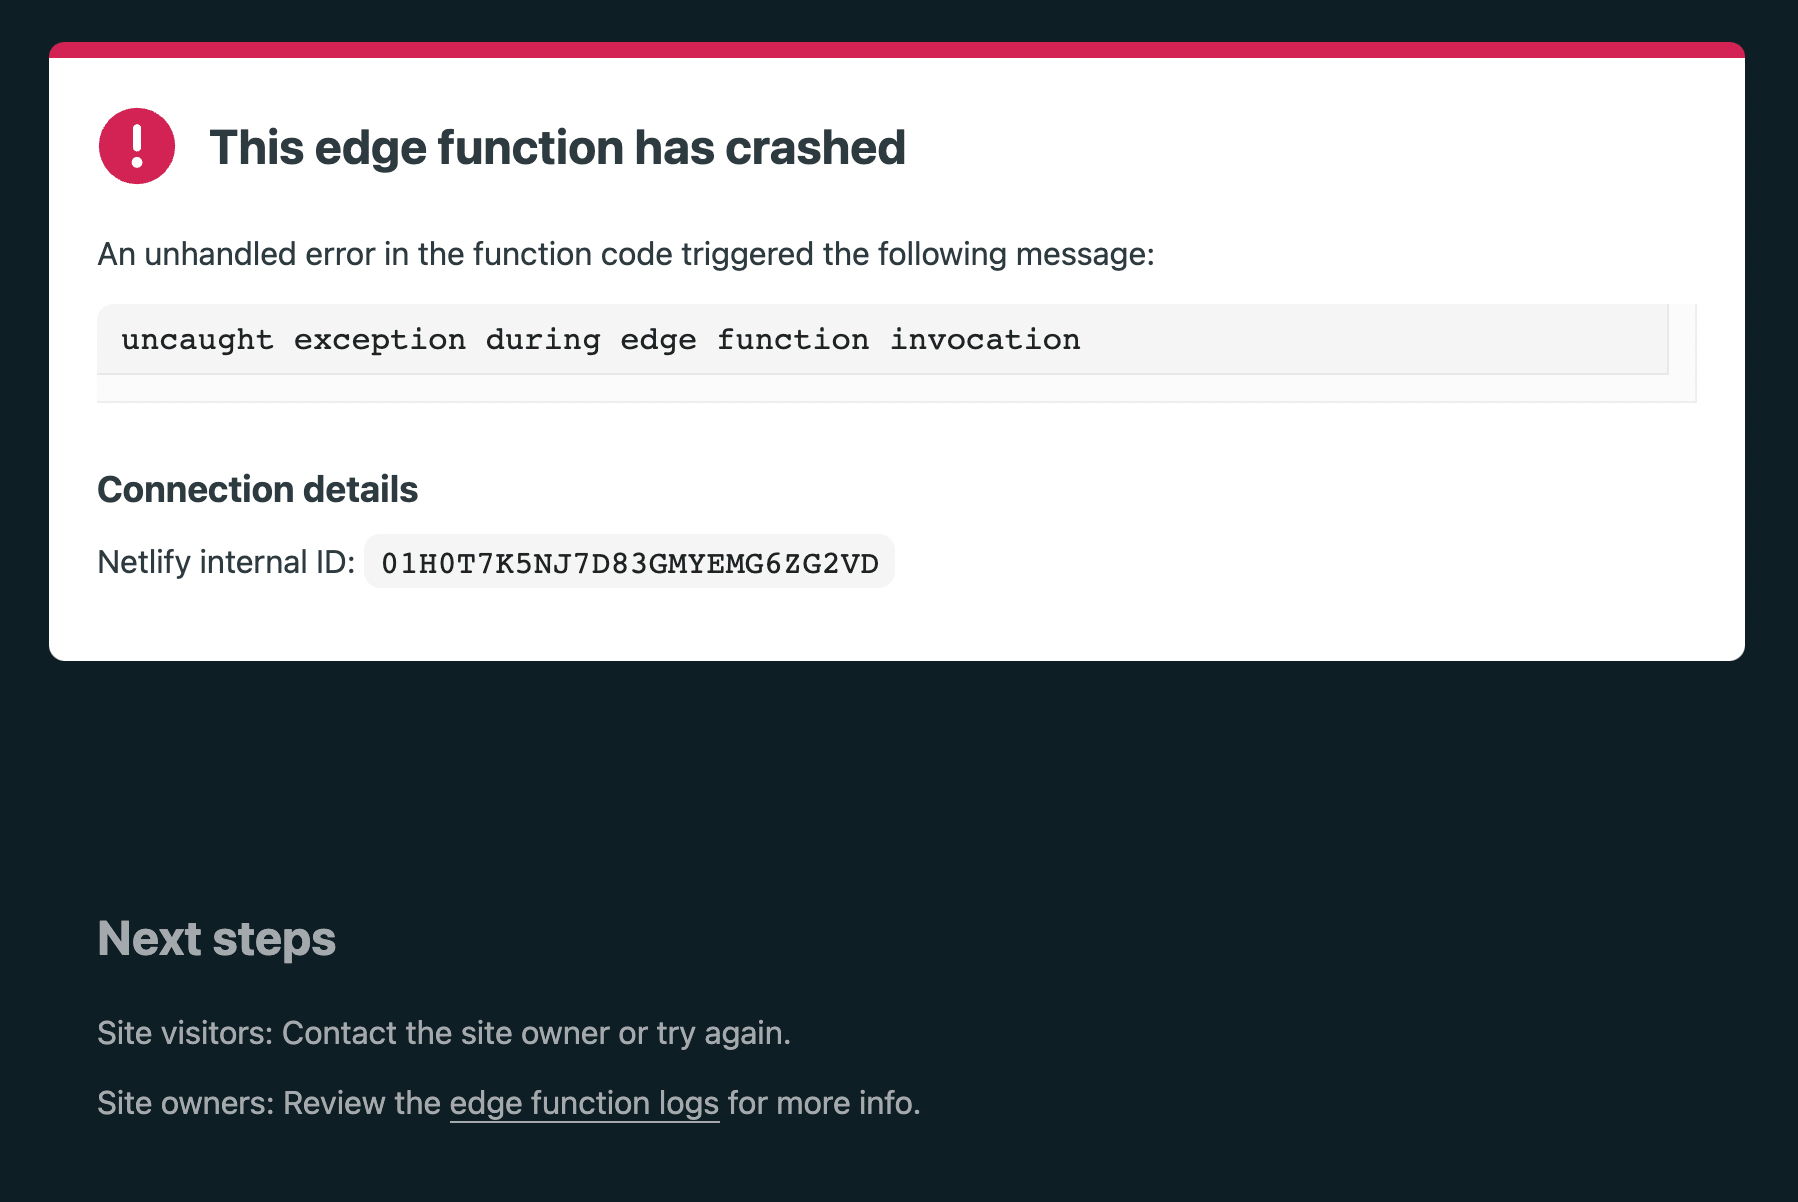 Error page with error message and next steps for site visitors and site owners.